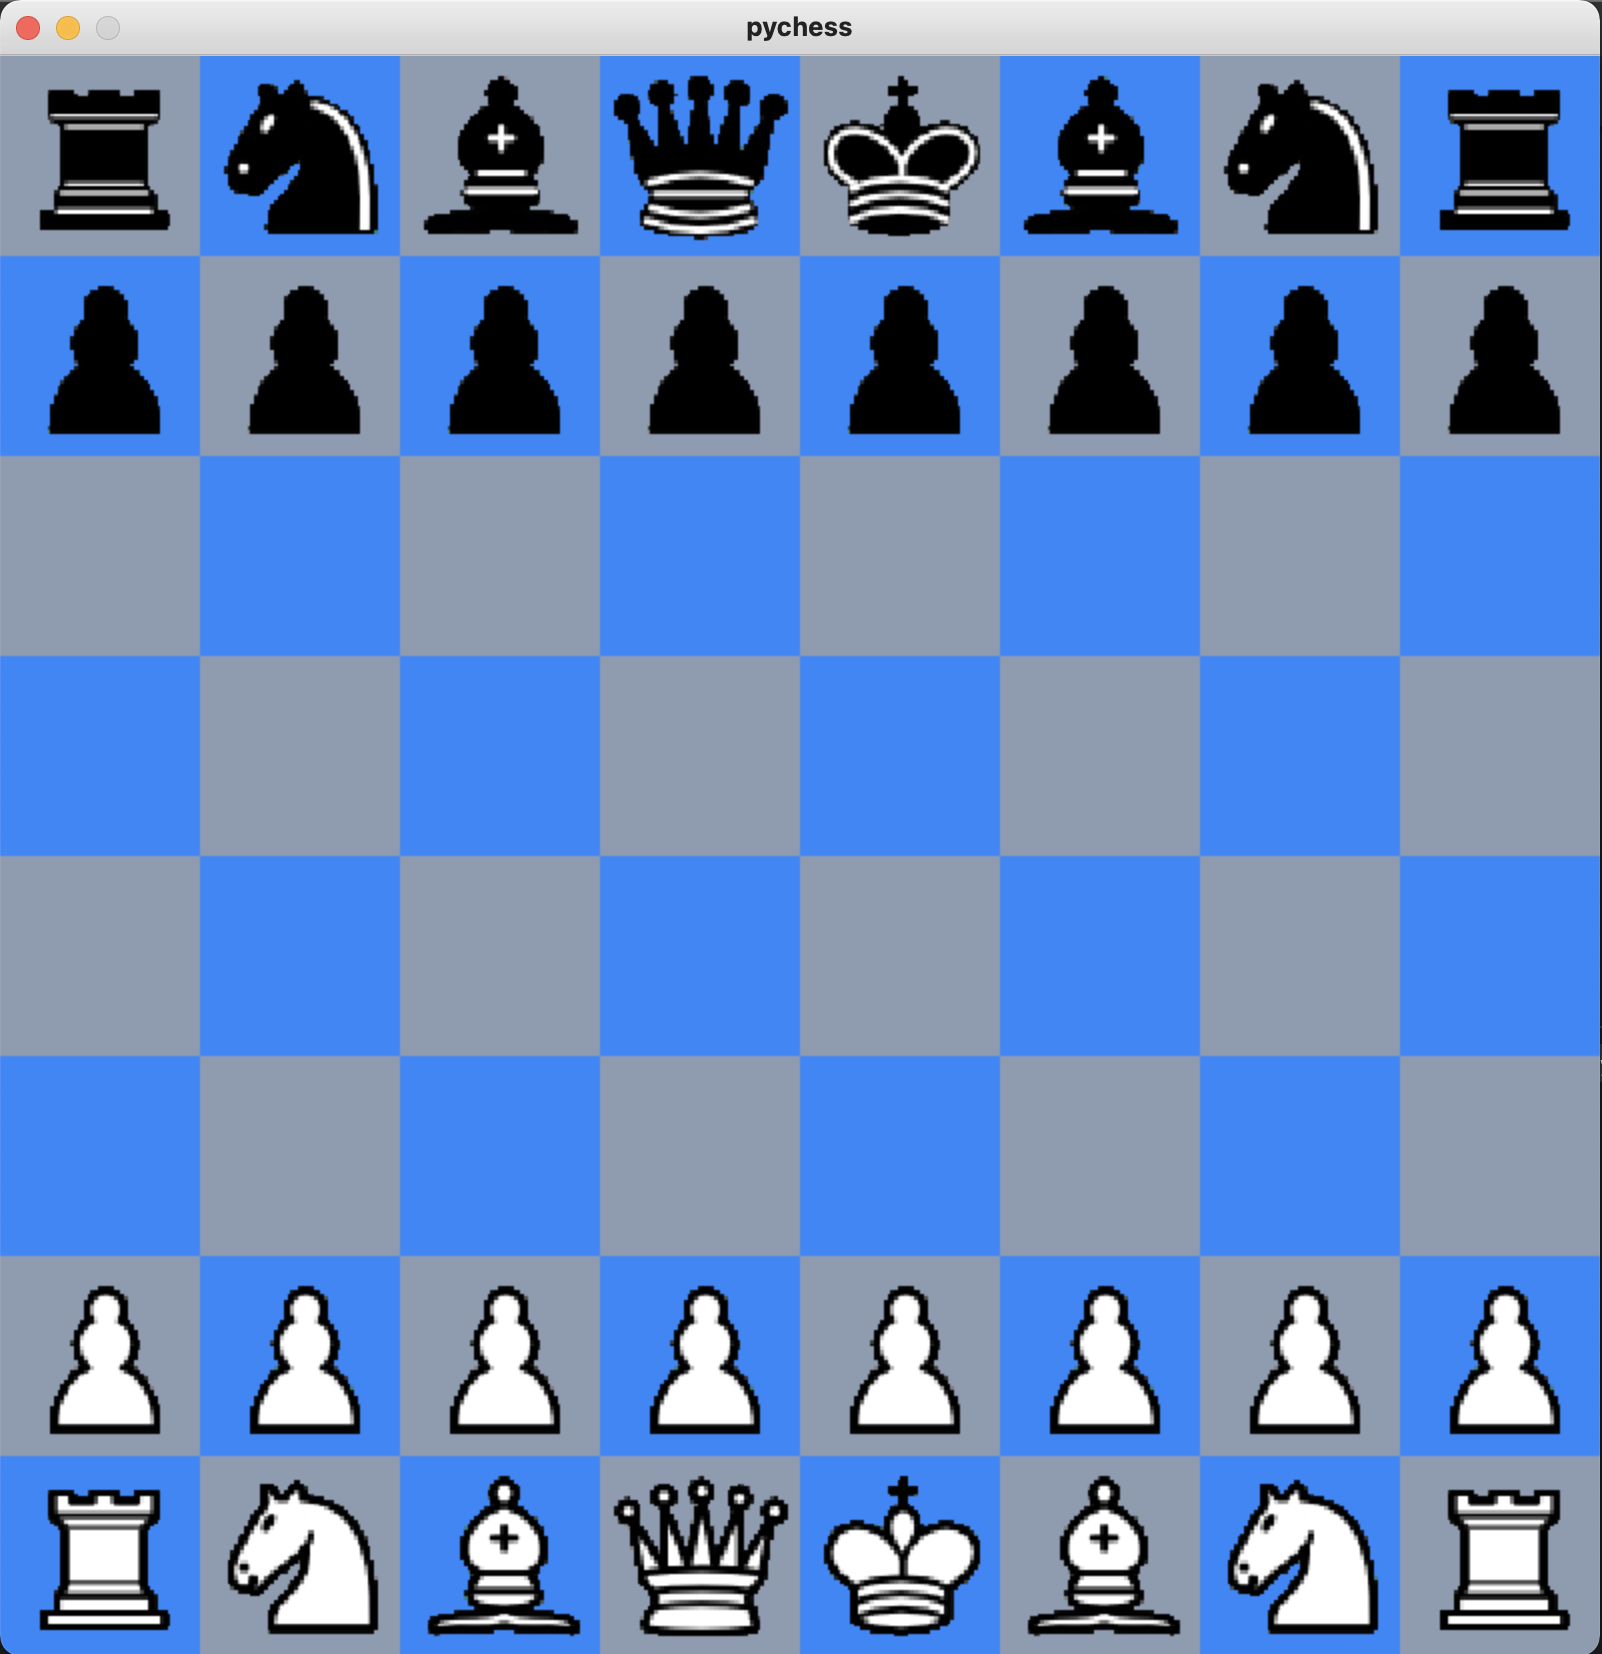 Released? · Issue #26 · fsmosca/Python-Easy-Chess-GUI · GitHub